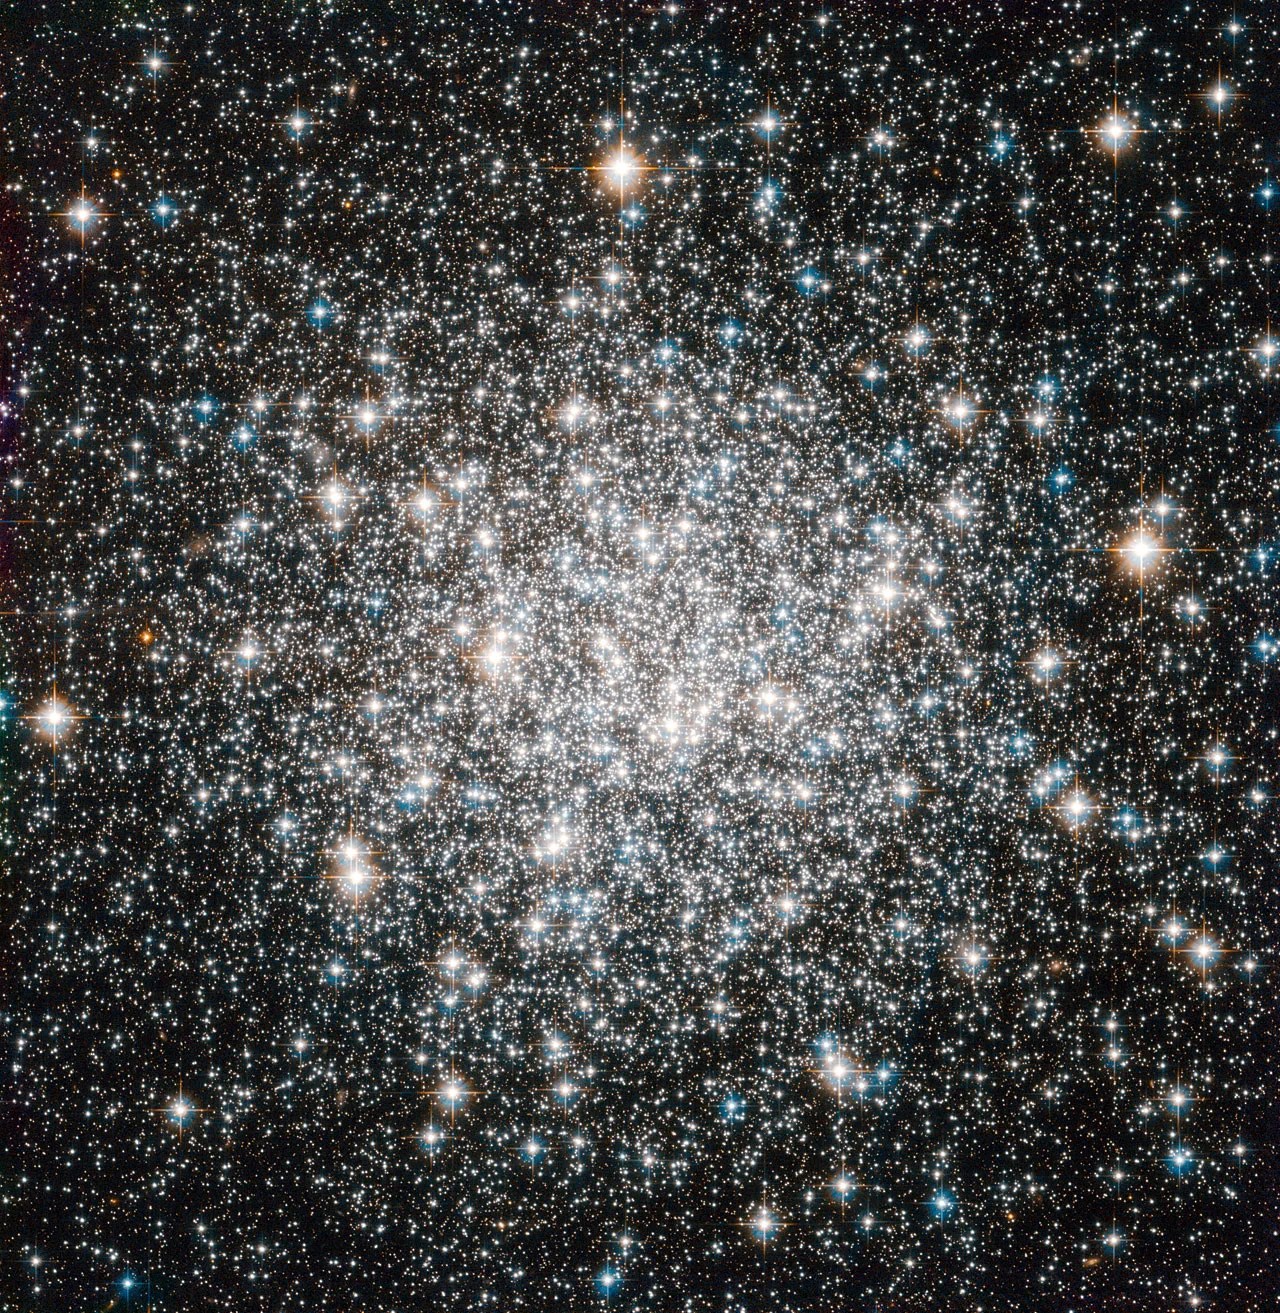 A bright cluster of white stars, more concentrated near the center.